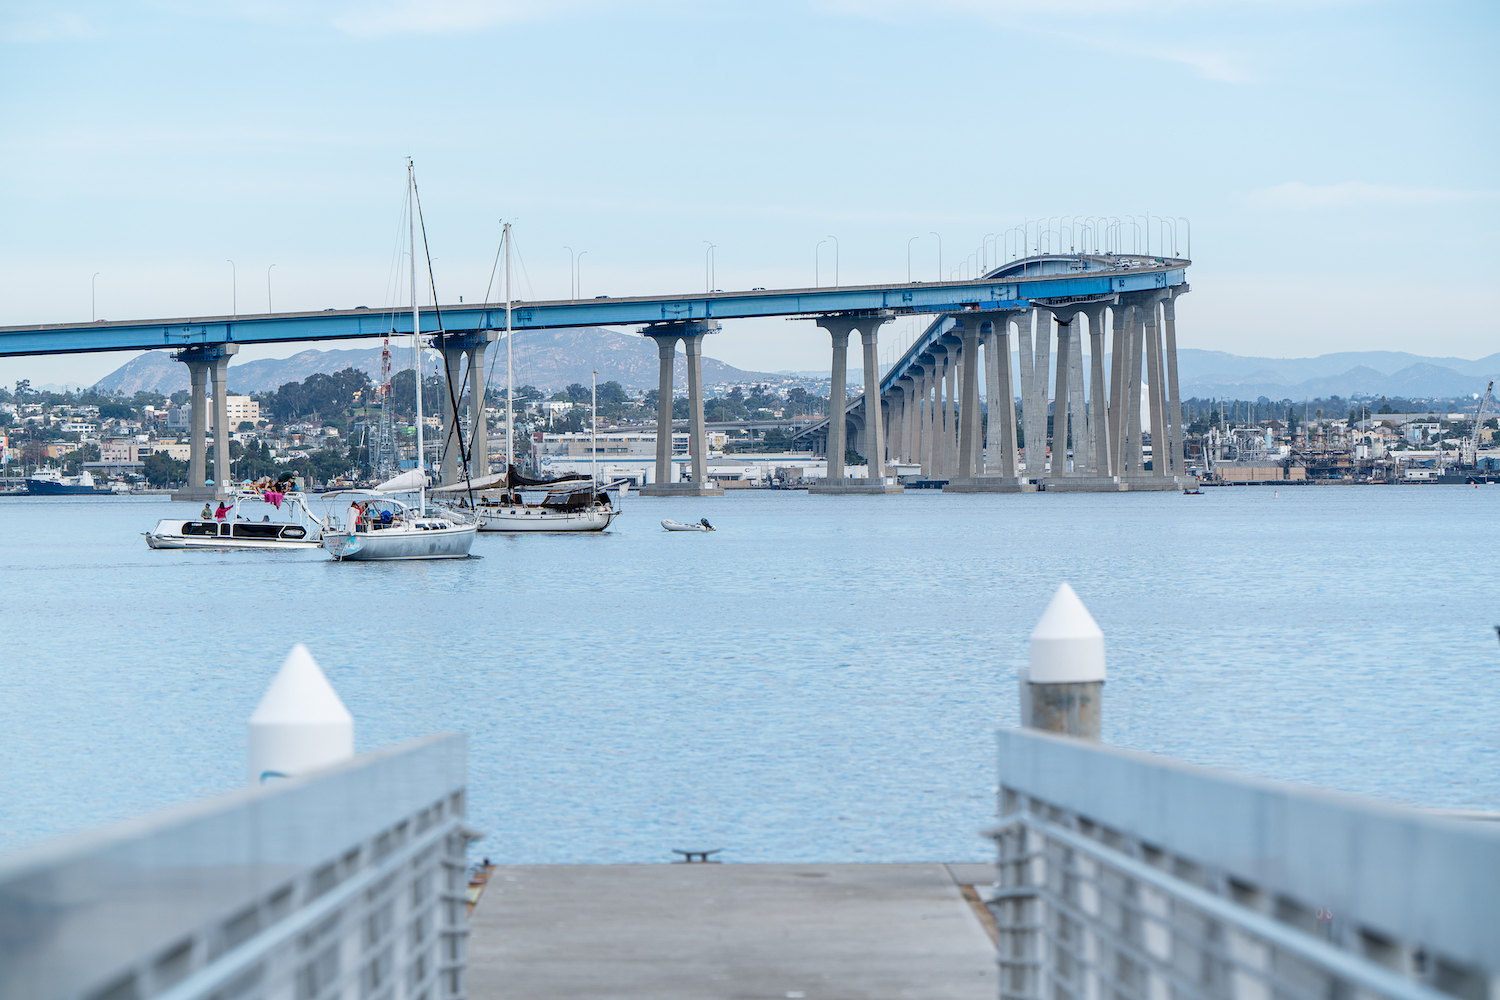 View of the Coronado Bridge and San Diego's South Bay from the Glorietta Bay Park